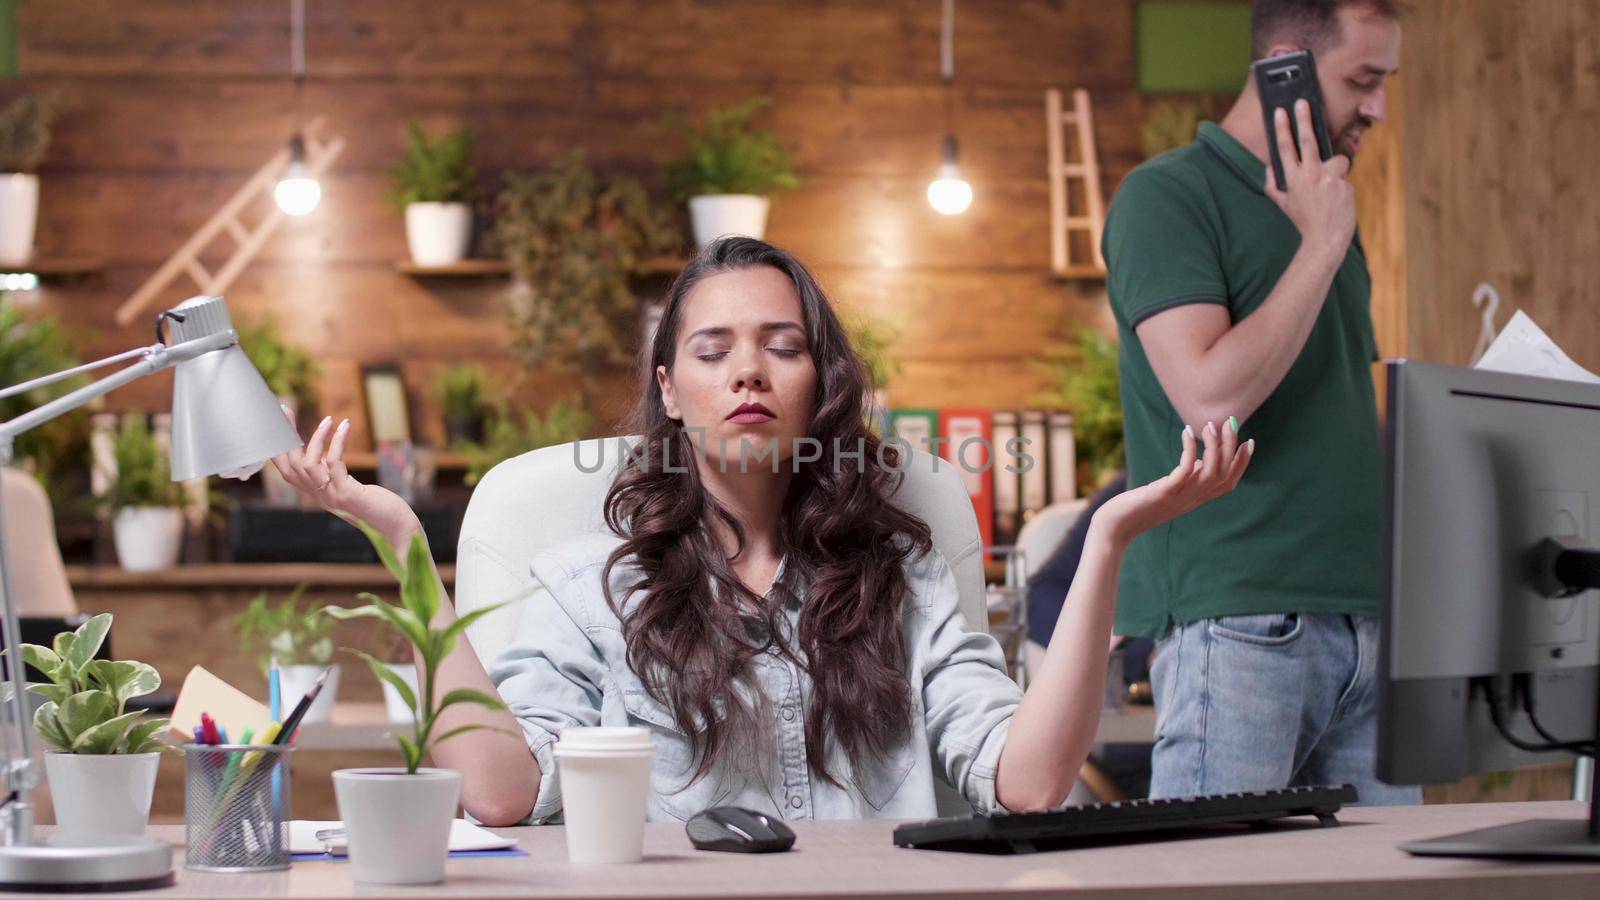 Relaxed zen businesswoman with closed eyes sitting at desk in yoga position meditating during work pause in startup business company office. Entrepreneur worker concentrating on breathing